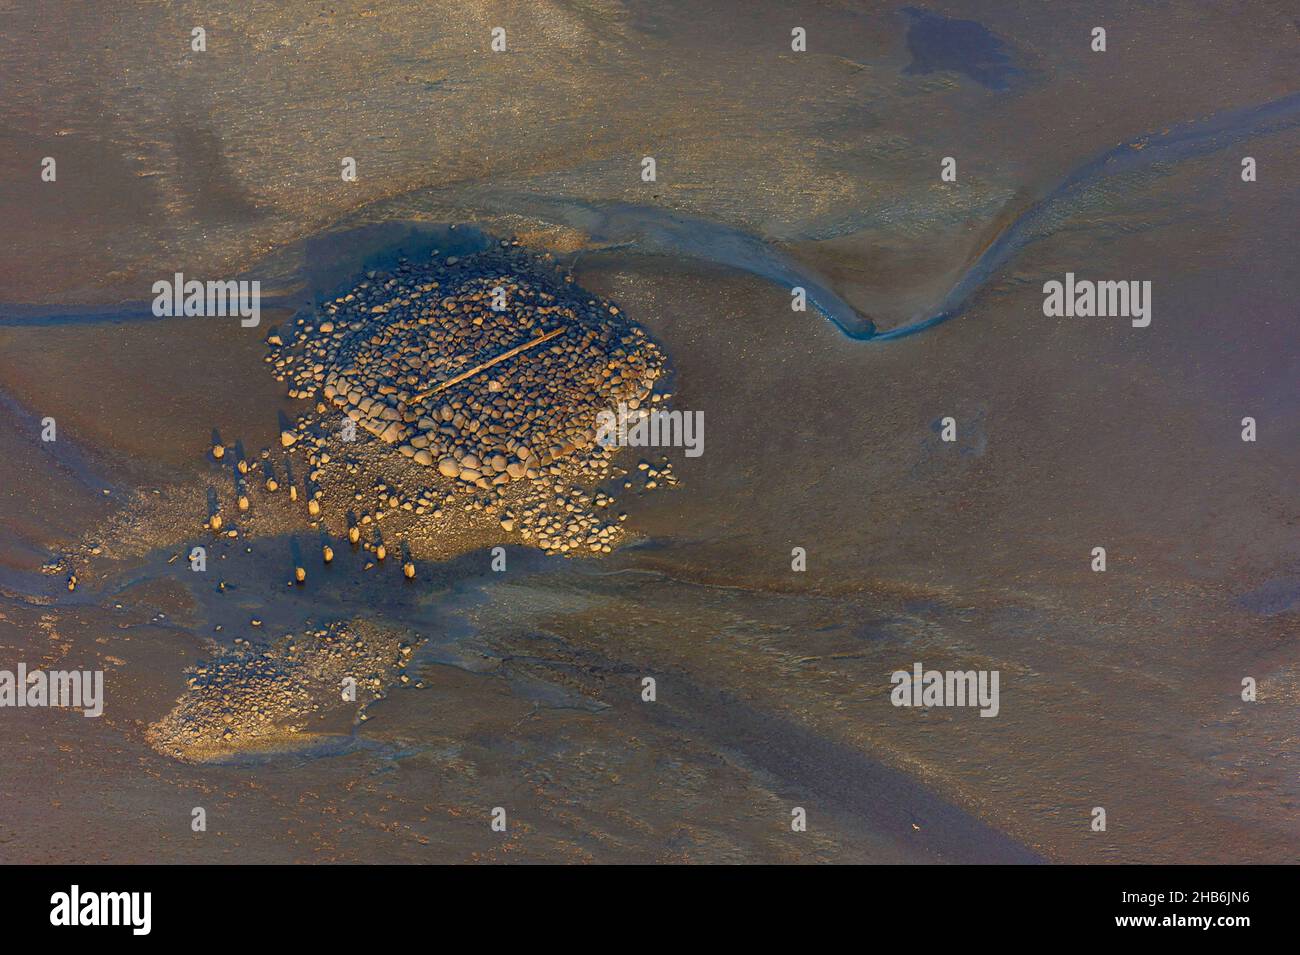 wooden beams on a stone rubble in the Elbe estuary off the island of Neuwerk, aerial view, Germany, Hamburgisches Wattenmeer National Park Stock Photo